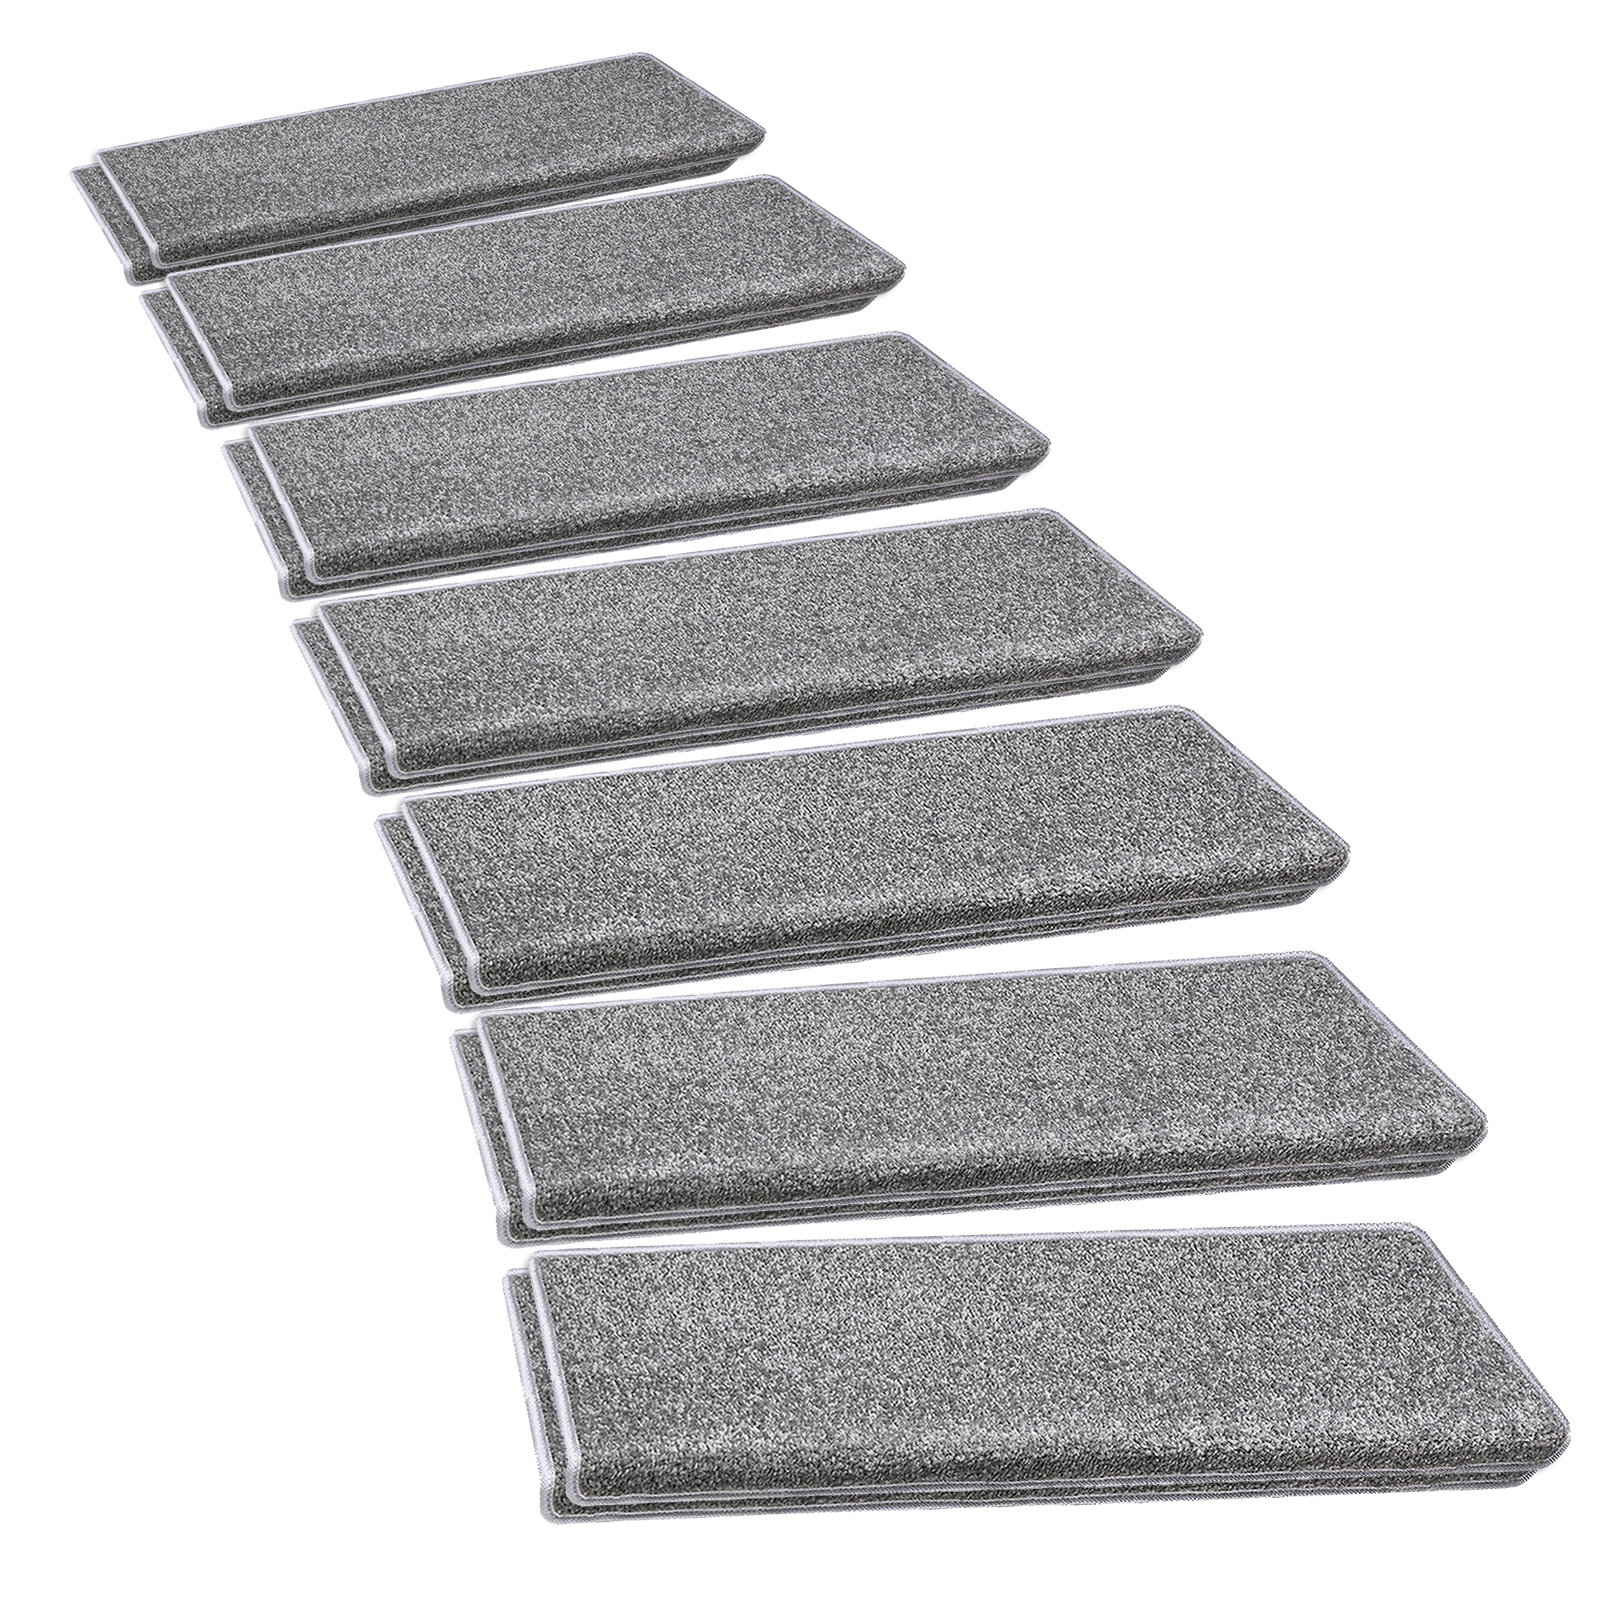 Stair Treads Carpet Step Runners - 14+1 Pc. Set, Adhesive Backing with  Non-Skid Slip Resistance, Indoor Soft and Quiet Wooden Surface Covers for  Kids